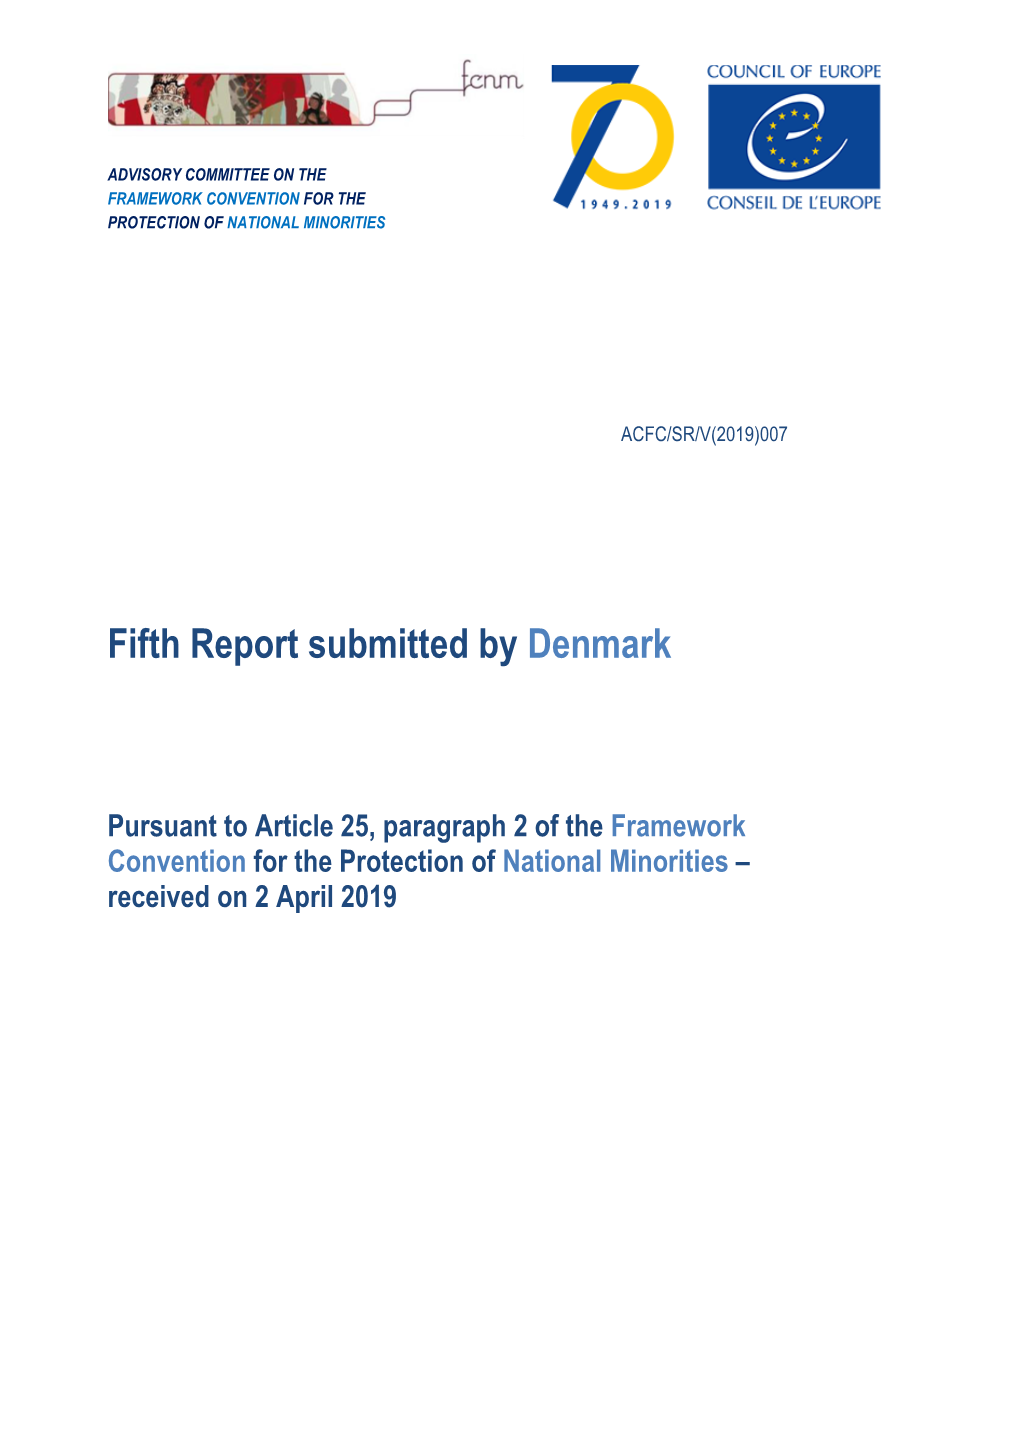 Fifth Report Submitted by Denmark